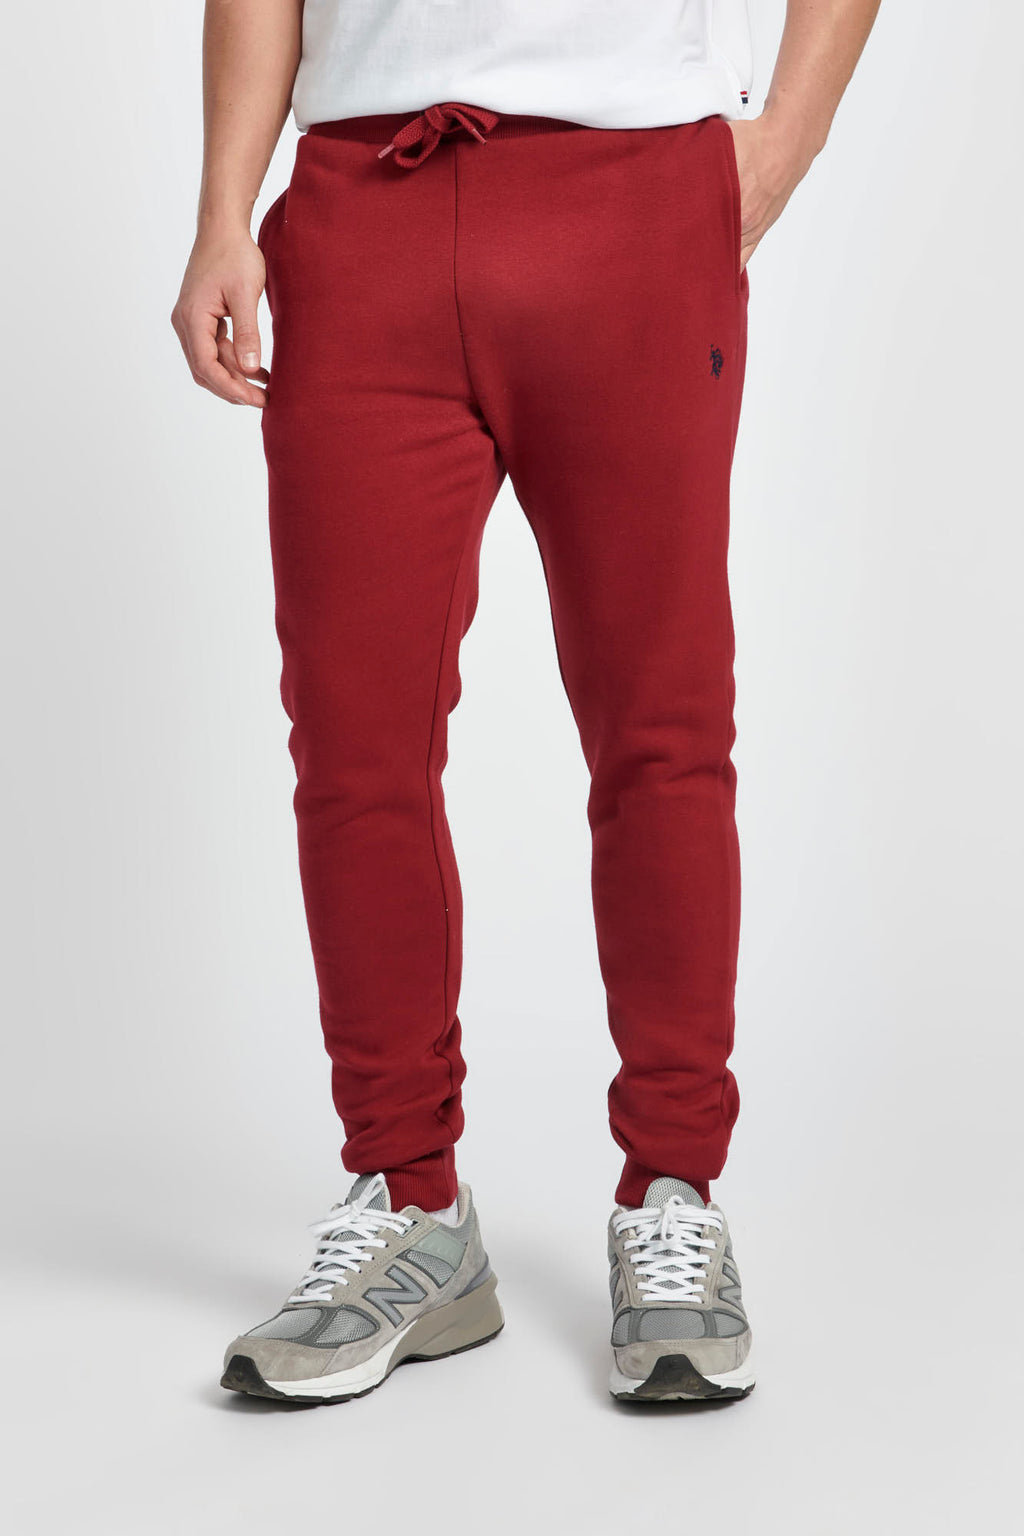  POLO RALPH LAUREN Mens Fleece Joggers Brushed Red Tiger  Sweatpants in Red (as1, Alpha, s, Regular, Regular) : Clothing, Shoes &  Jewelry